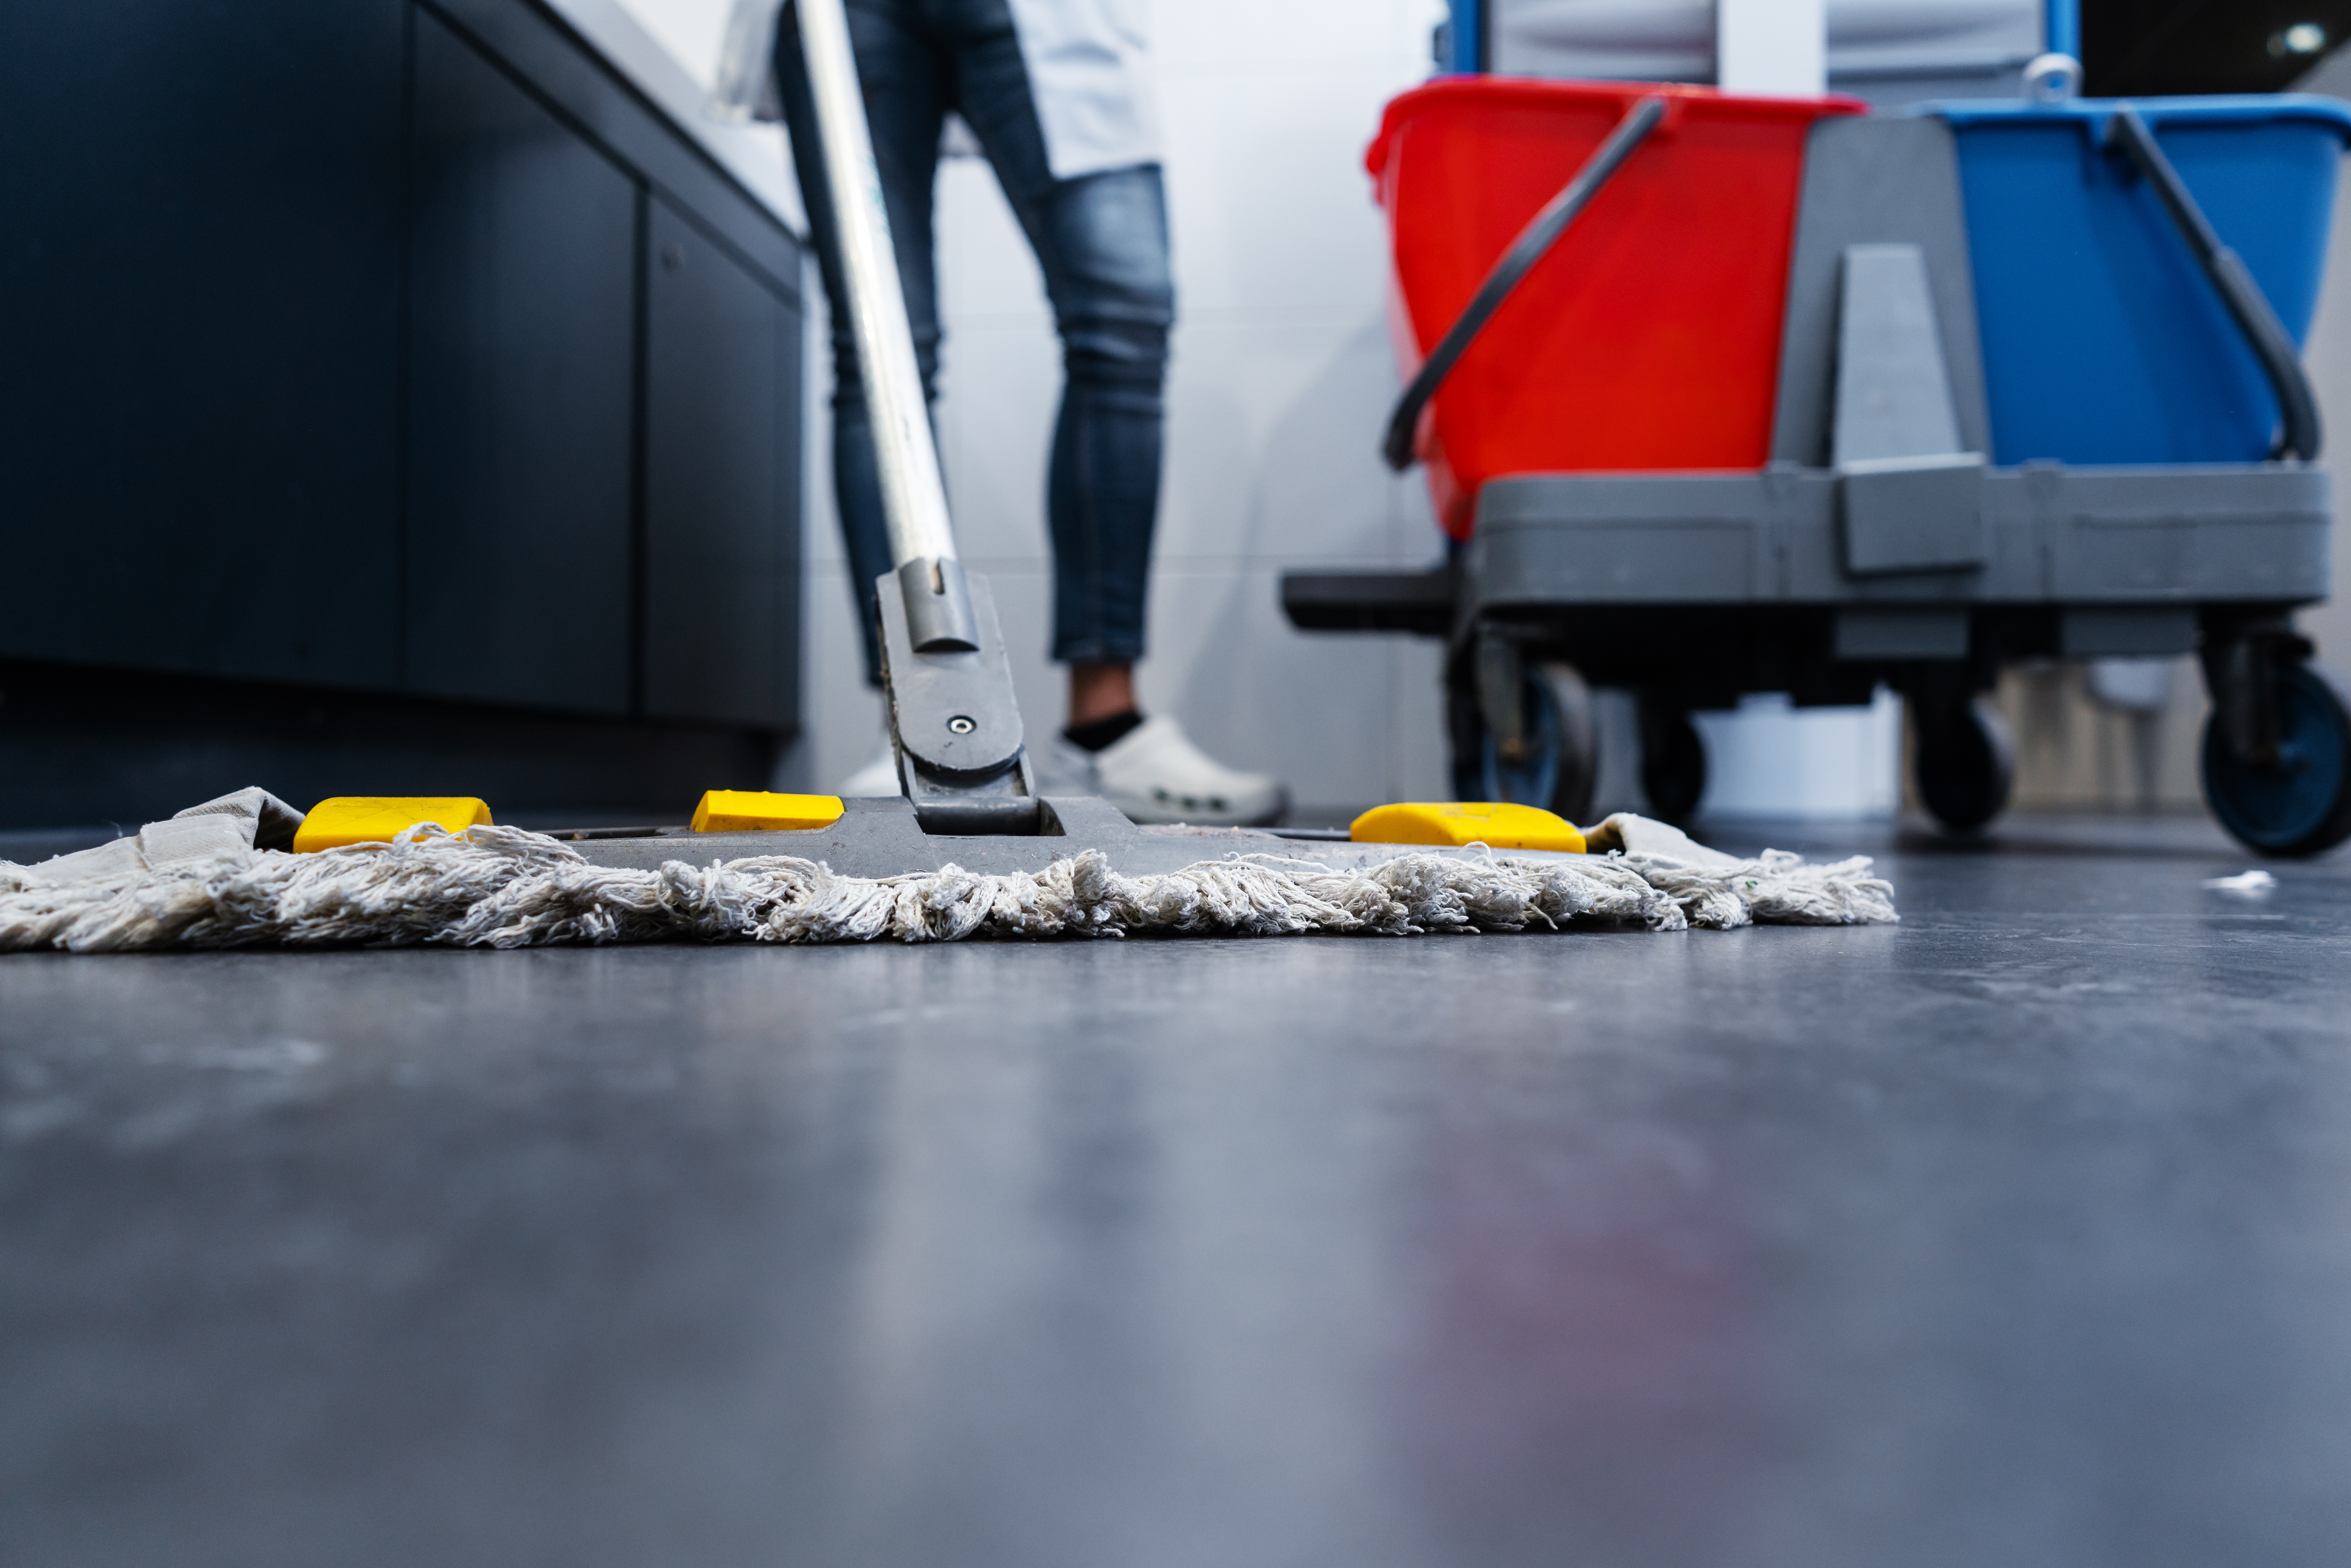 How to Clean Commercial Floors Efficiently